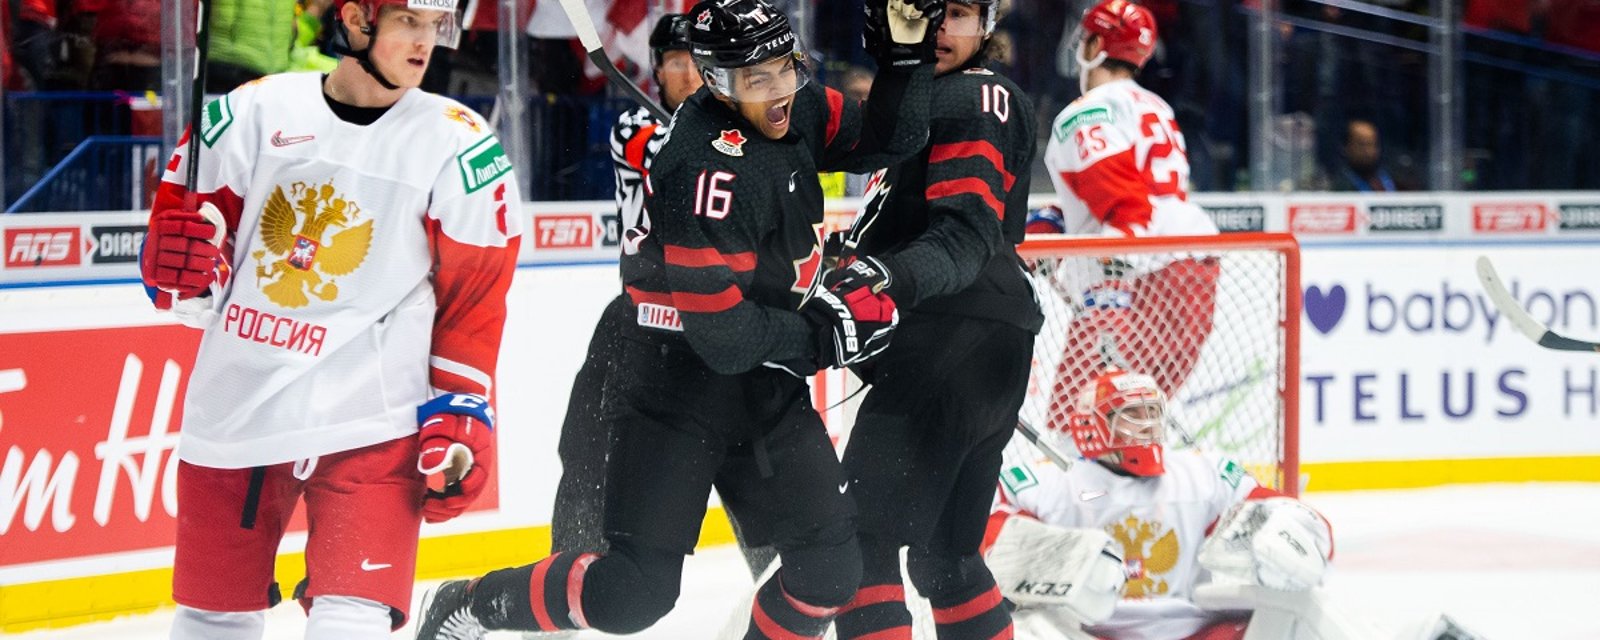 Non-call late in the third period of World Juniors Finals sparks outrage online.